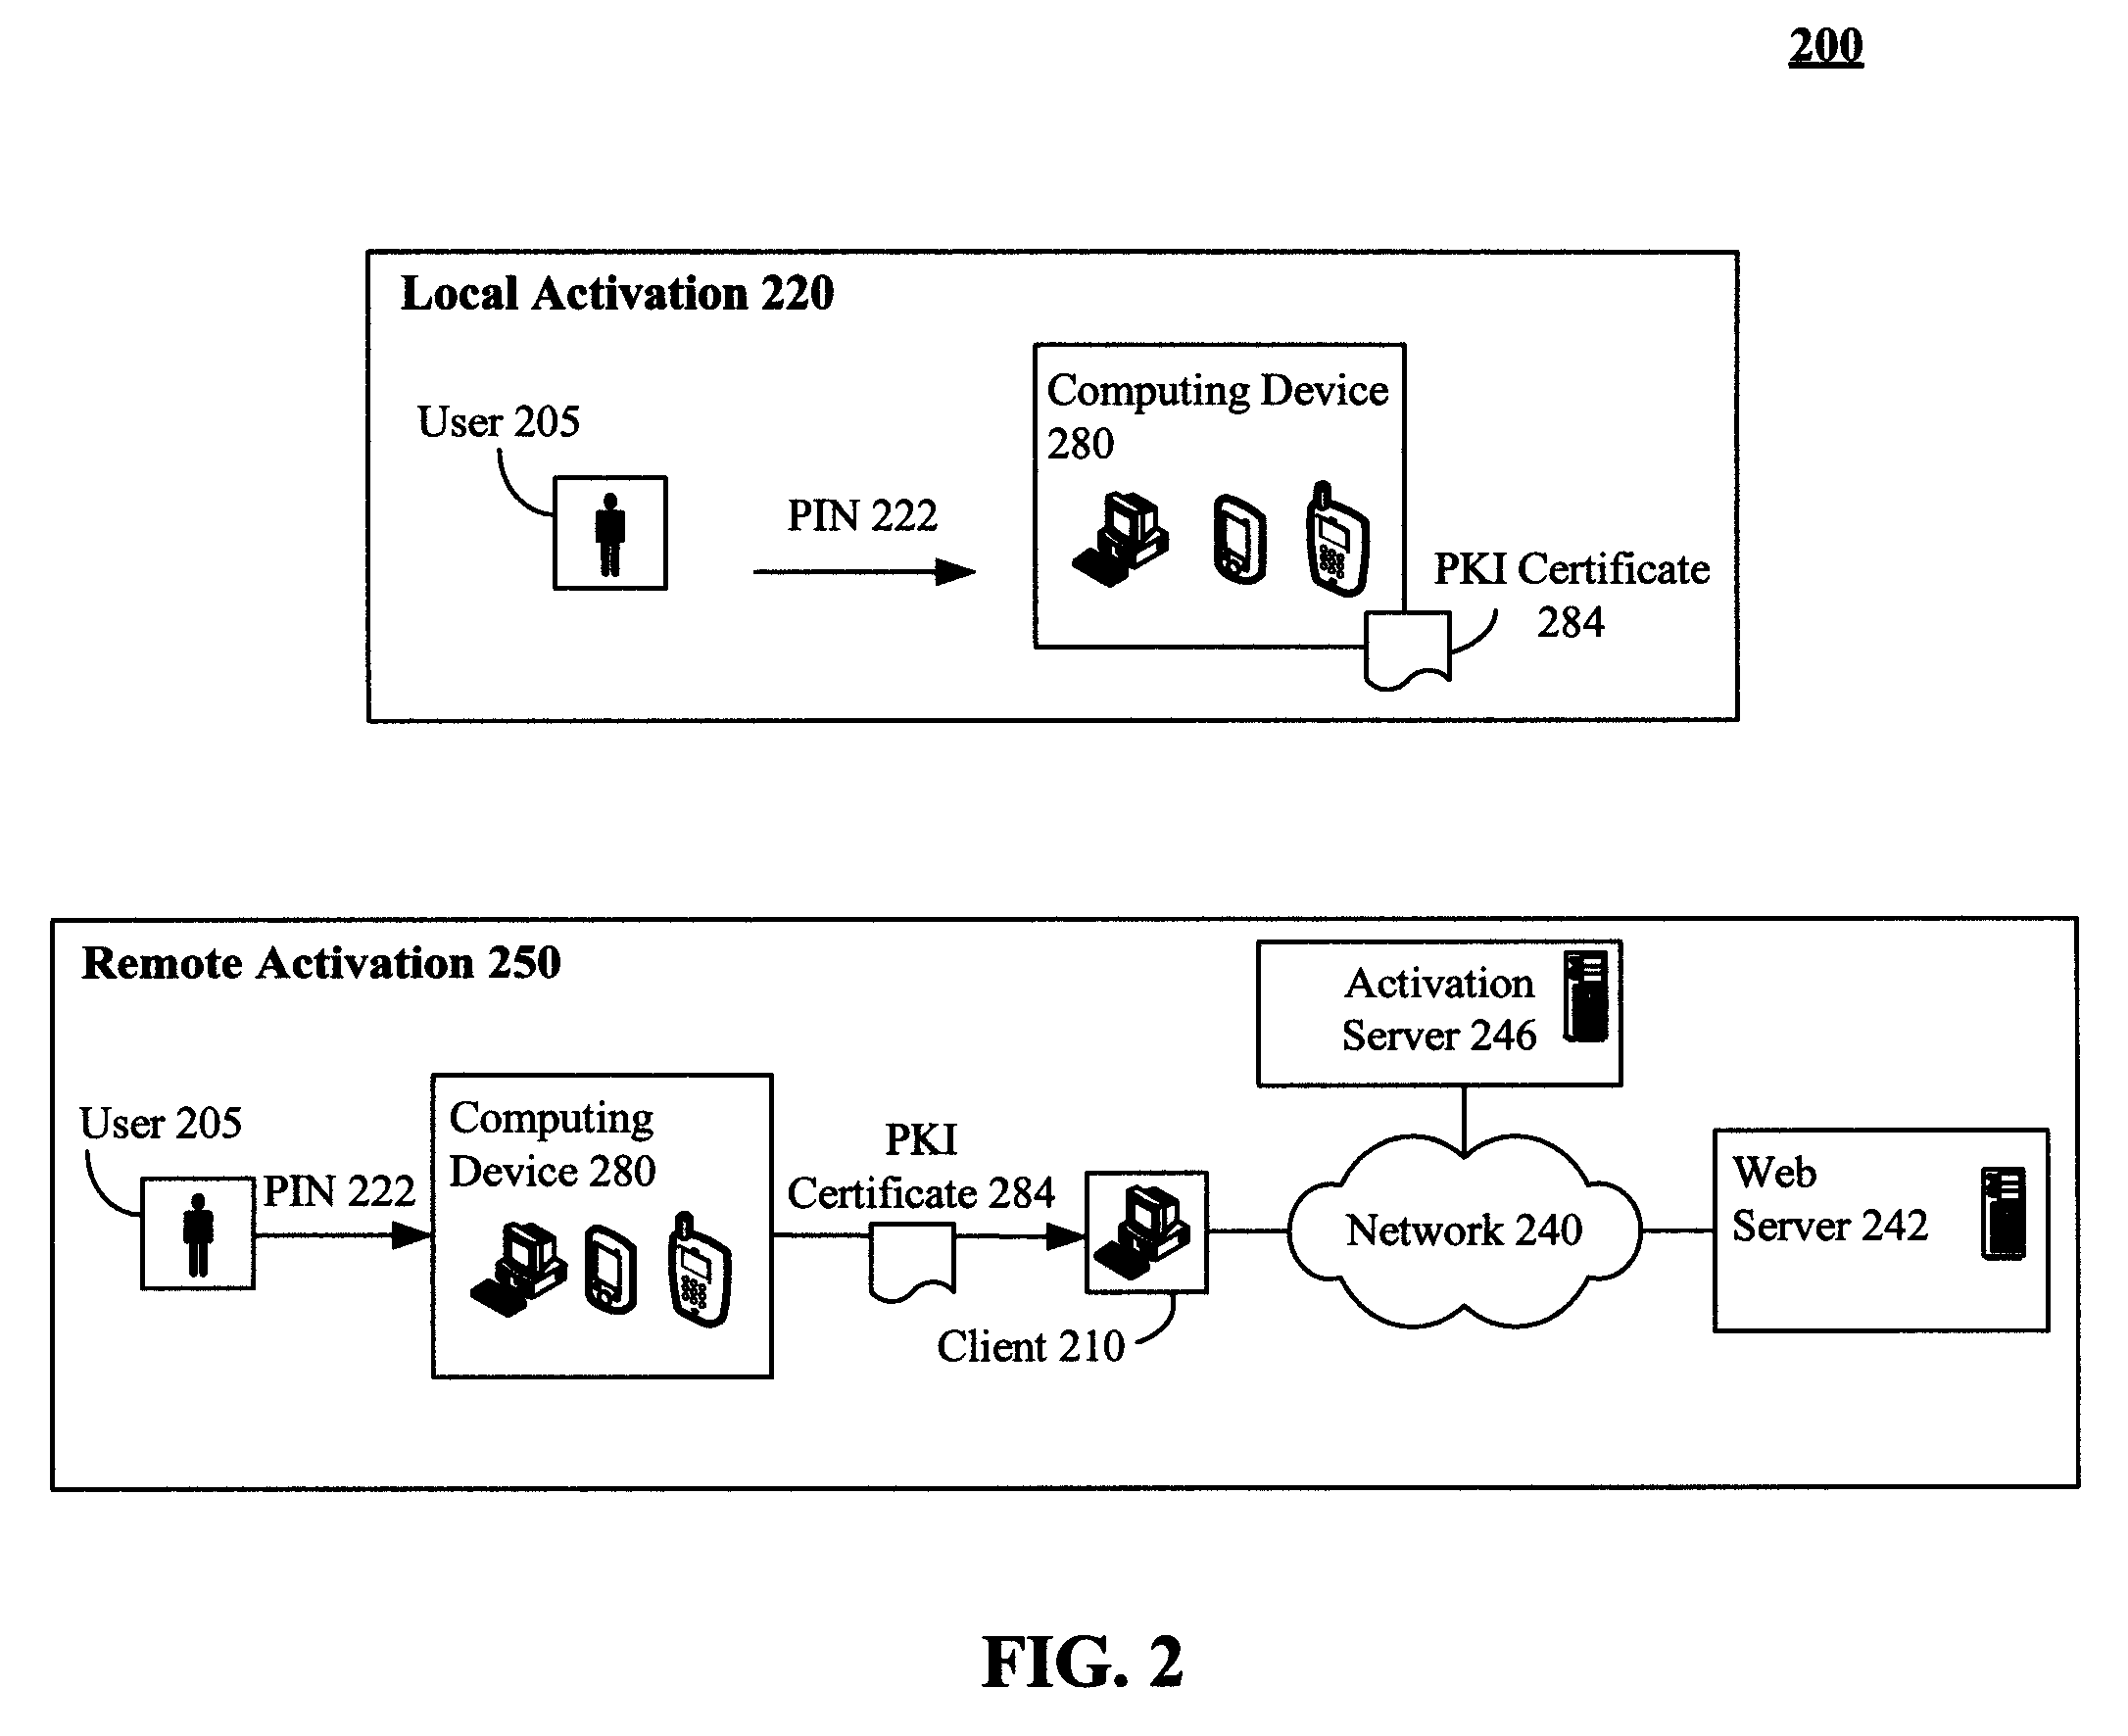 Secure physical distribution of a security token through a mobile telephony provider's infrastructure